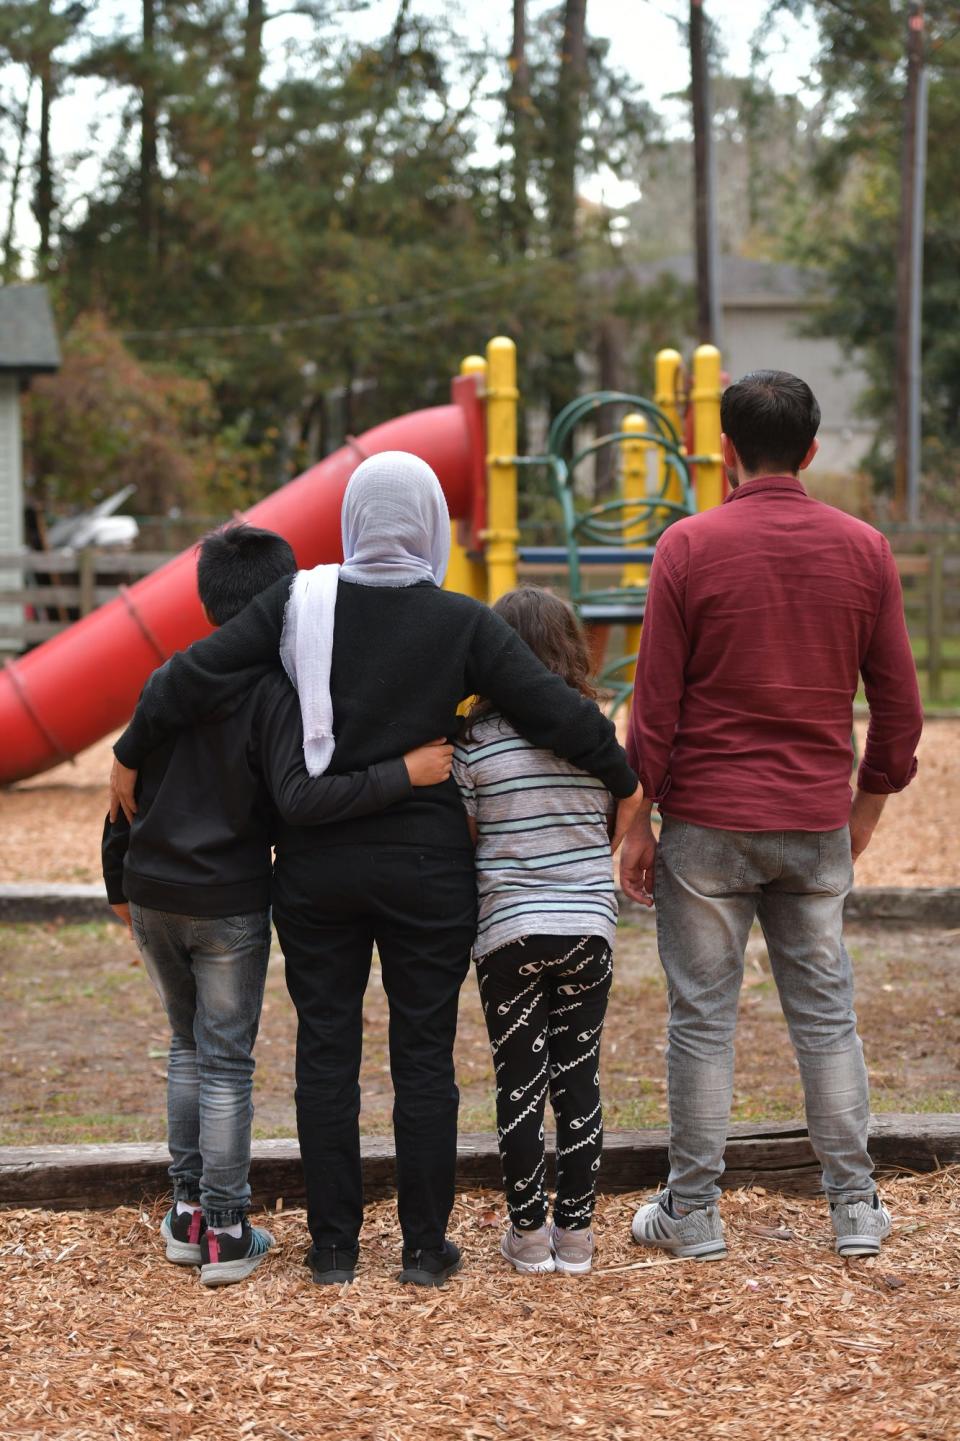 An Afghan mom and her two kids along with her cousin are getting used to their new environment in Savannah.